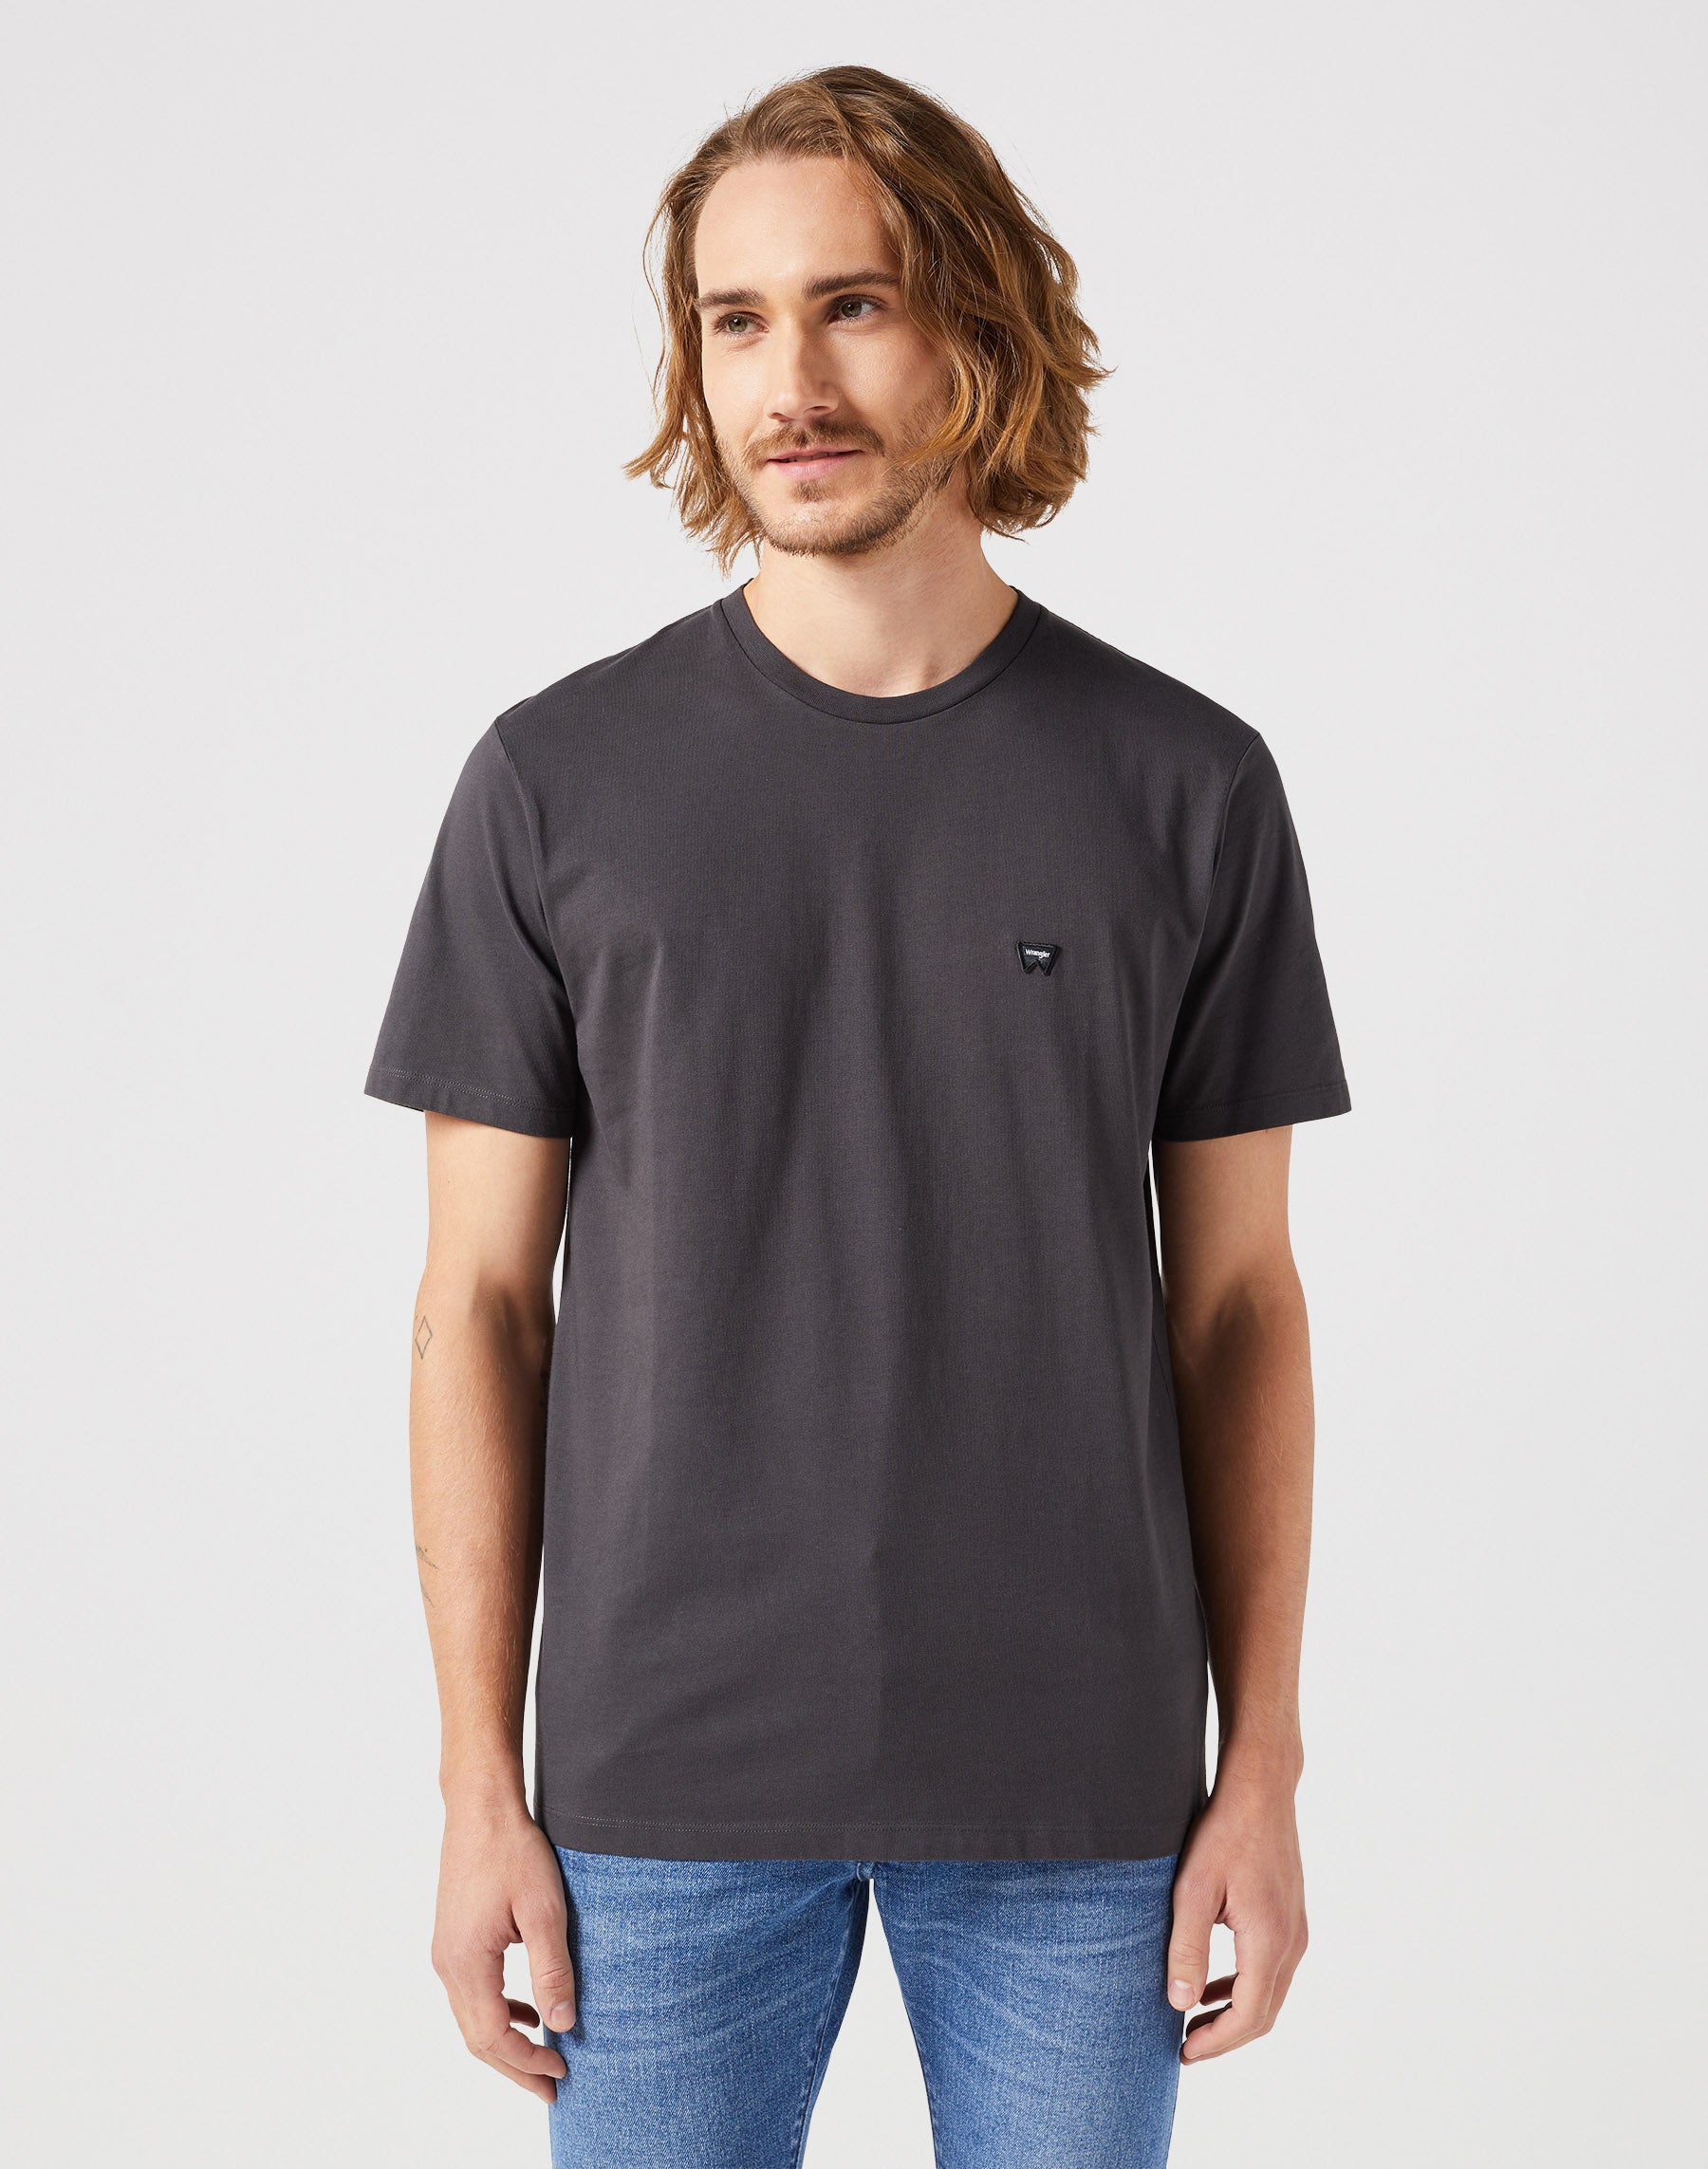 Sign Off Tee in Faded Black T-Shirts Wrangler   